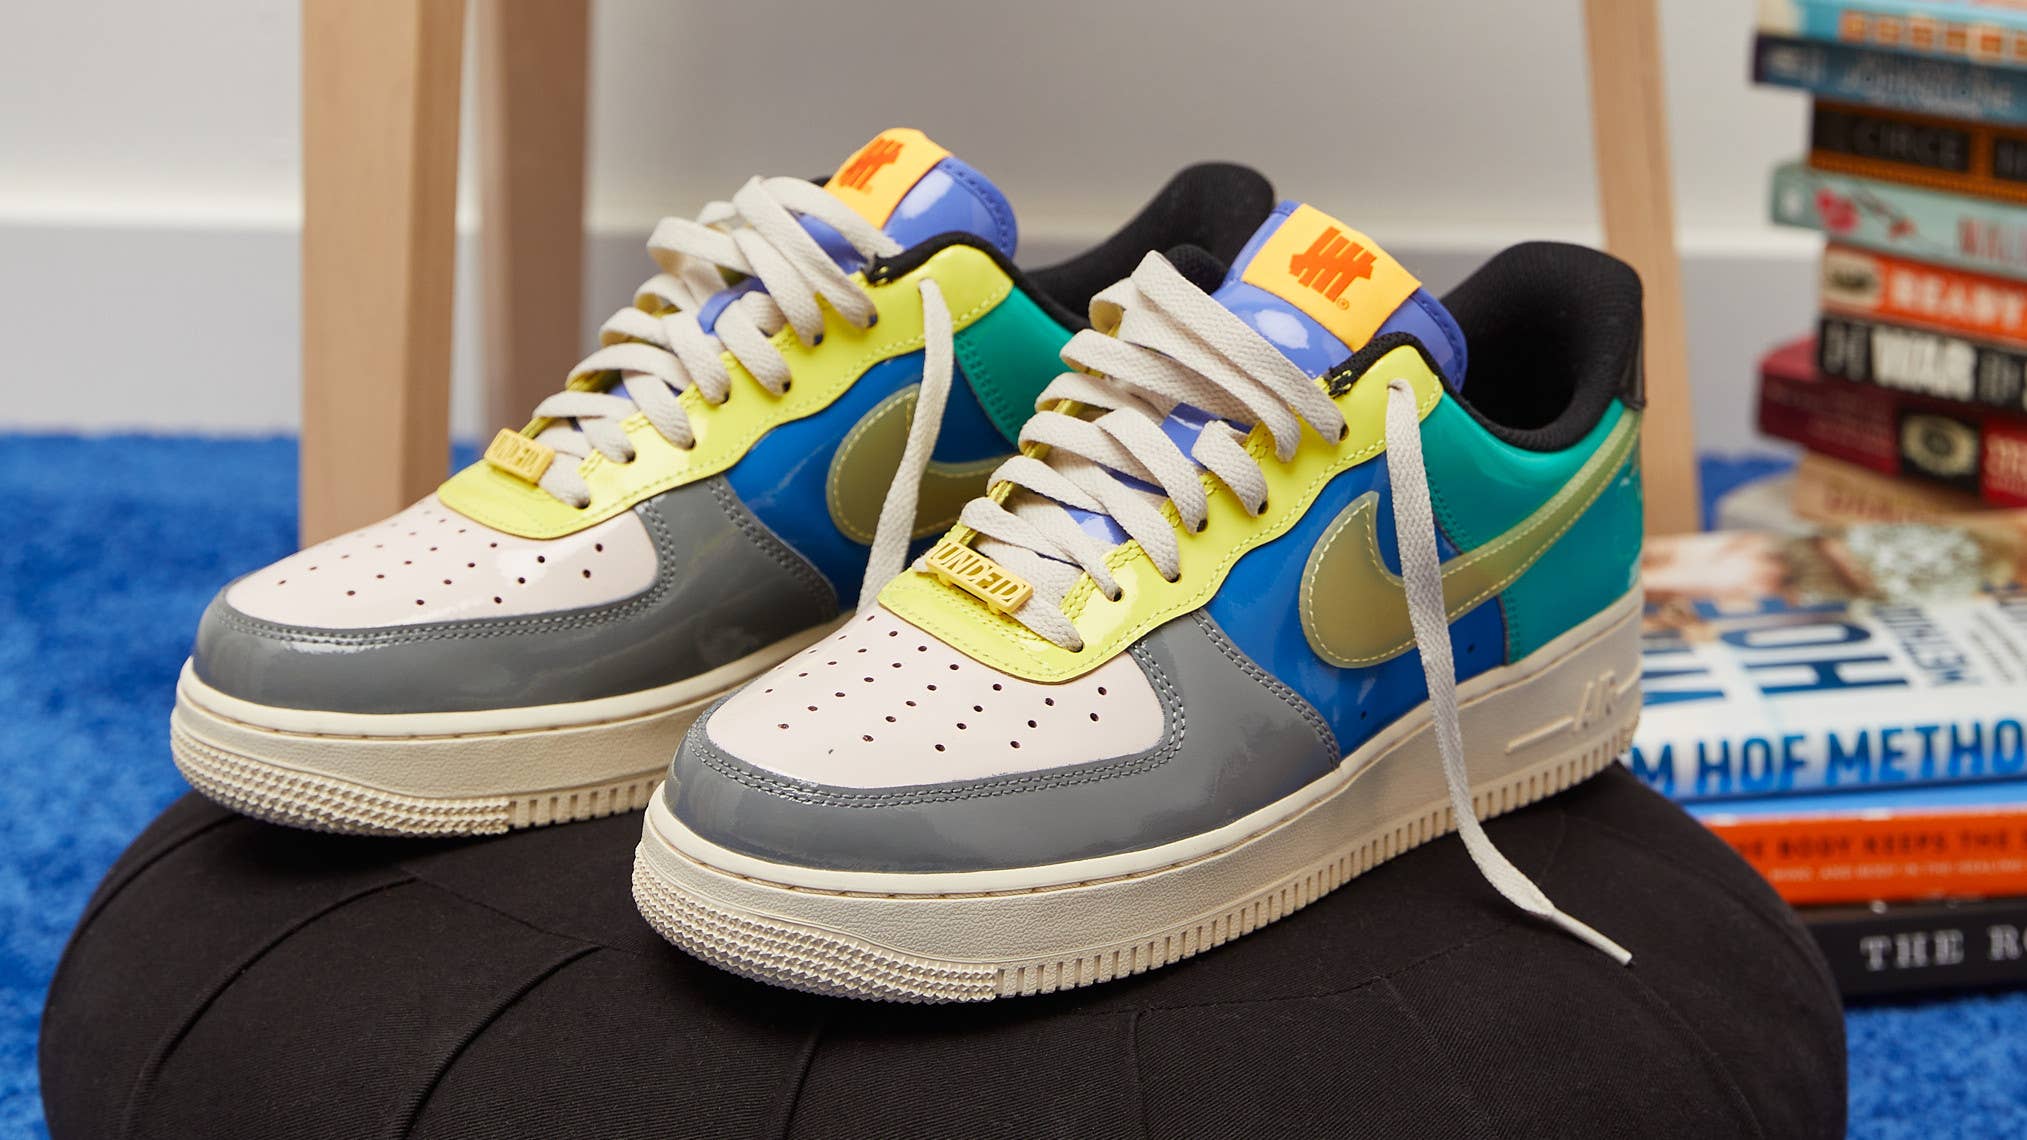 pelo Insistir Inclinarse Undefeated Announces First Patent Pack Nike Air Force 1 Release | Complex